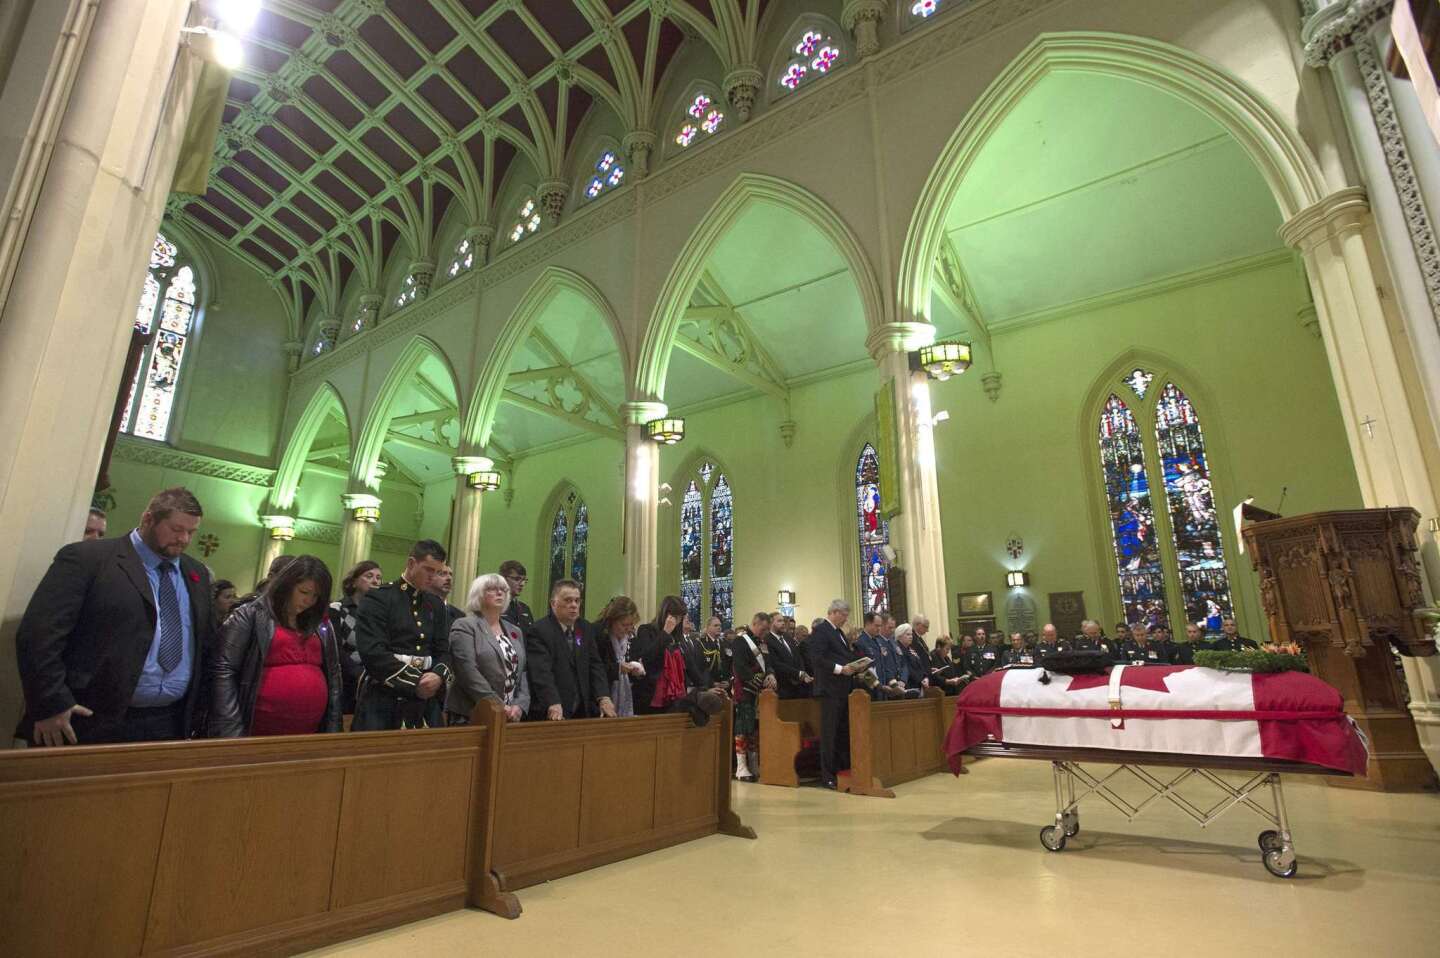 People bow their heads during the regimental funeral service for Cpl. Nathan Cirillo in Hamilton, Ontario